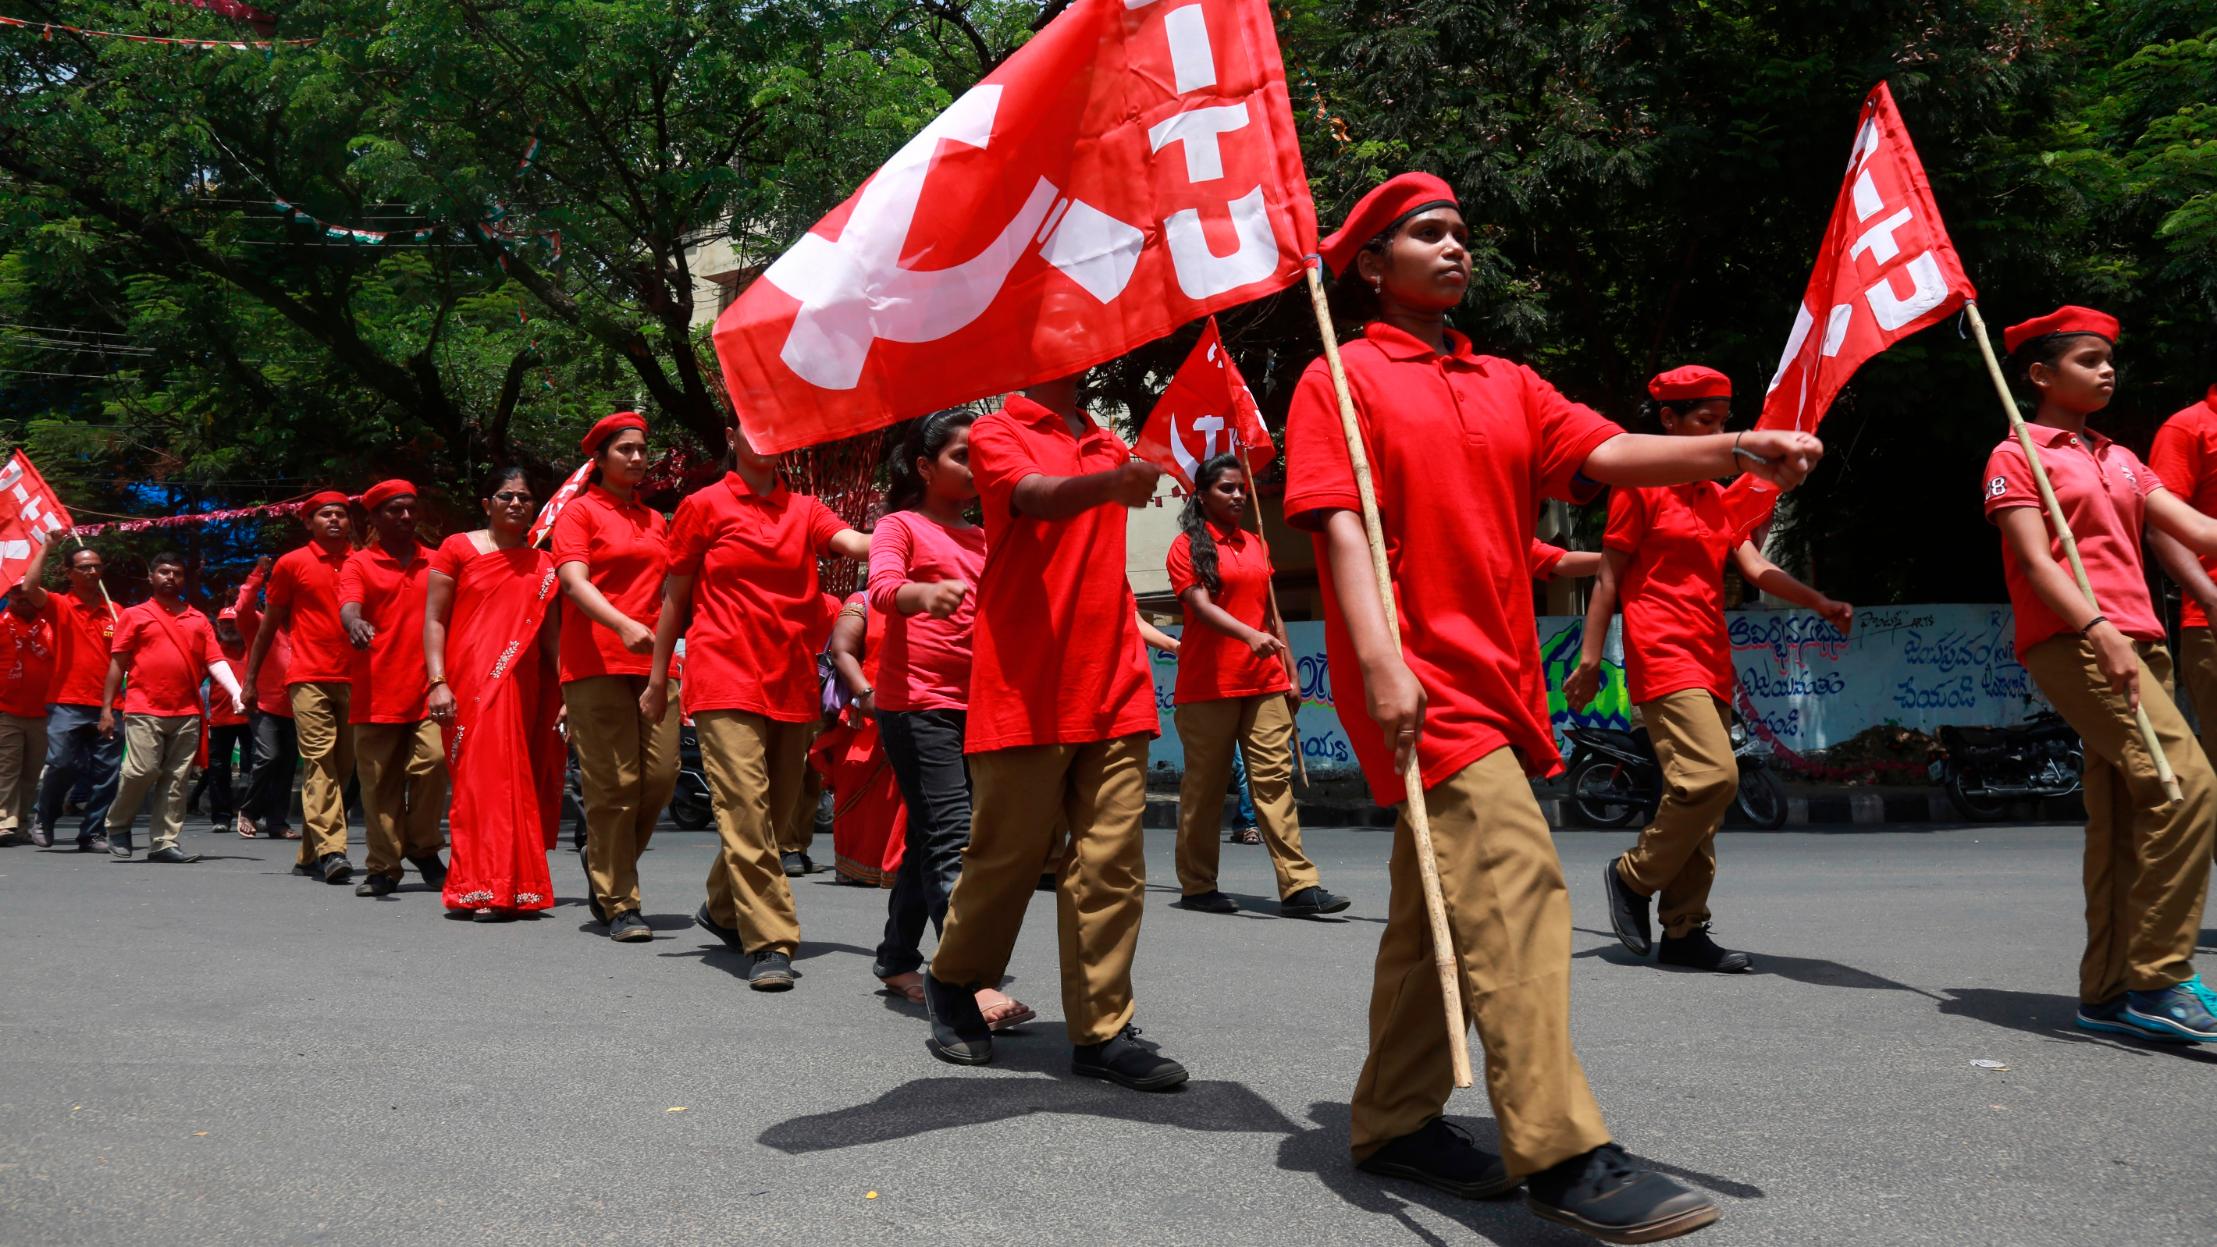 May Day In India How A Land Of 522 Million Workers Marks Labour Day Cnn Travel India in a day received over 16,000 videos, including entries from rajasthan, kerala, even the andaman and nicobar islands. cnn